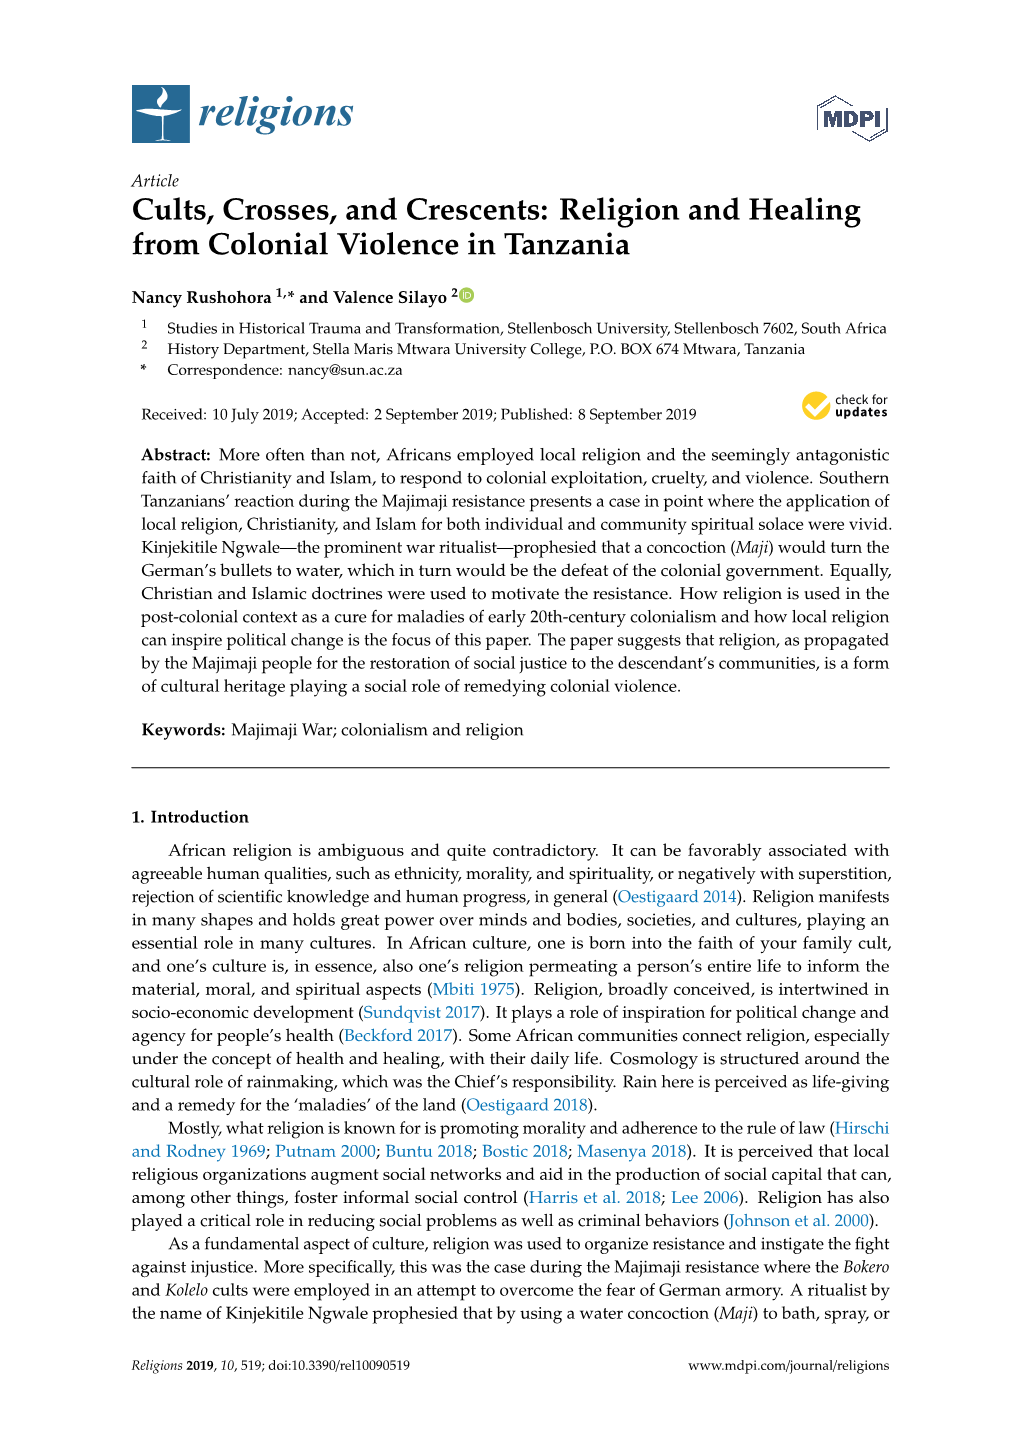 Cults, Crosses, and Crescents: Religion and Healing from Colonial Violence in Tanzania